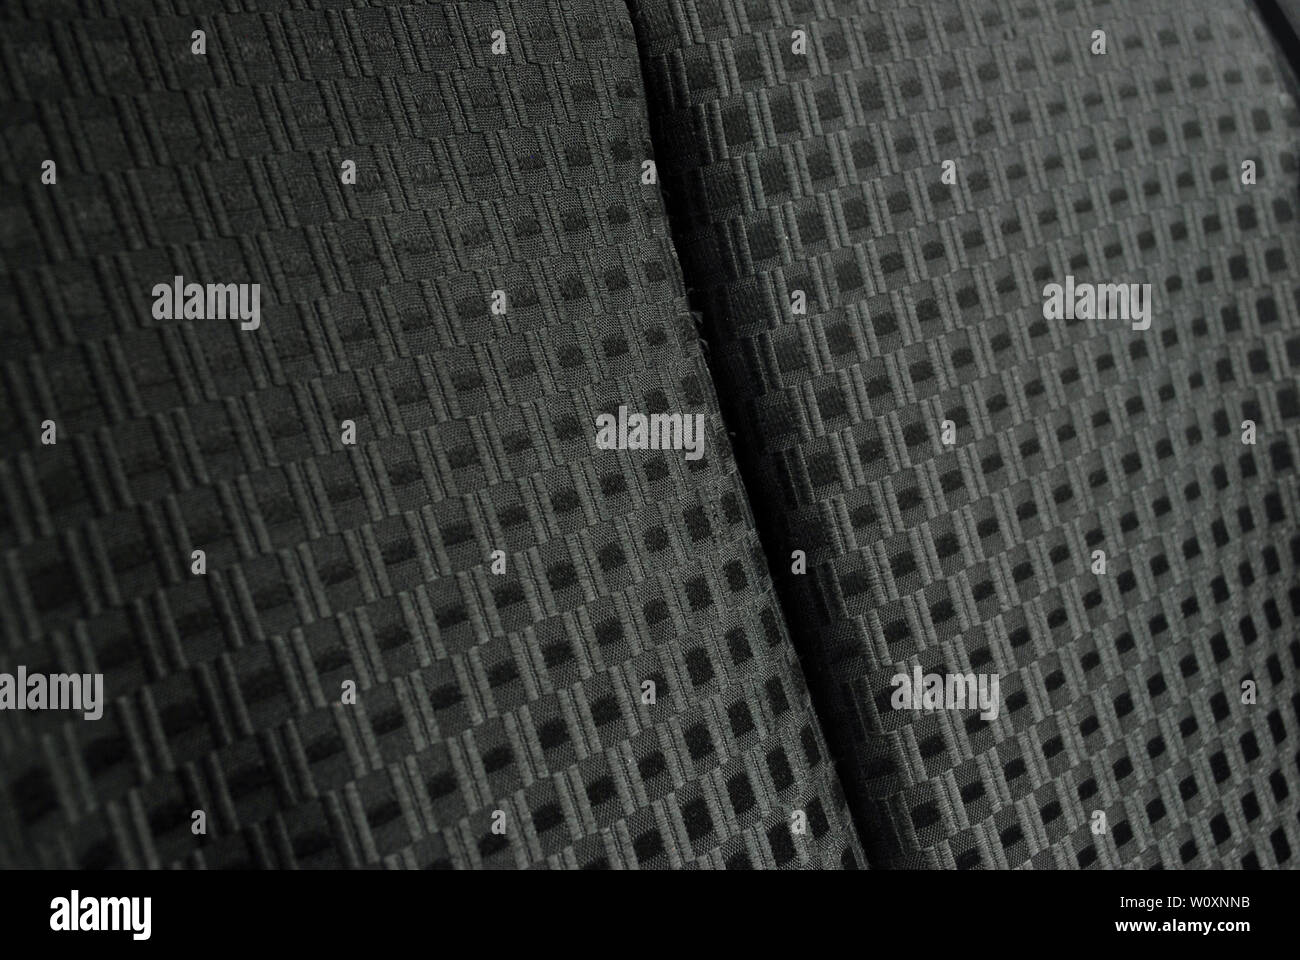 Mesh pattern background.Background patterned leather car seats. Stock Photo